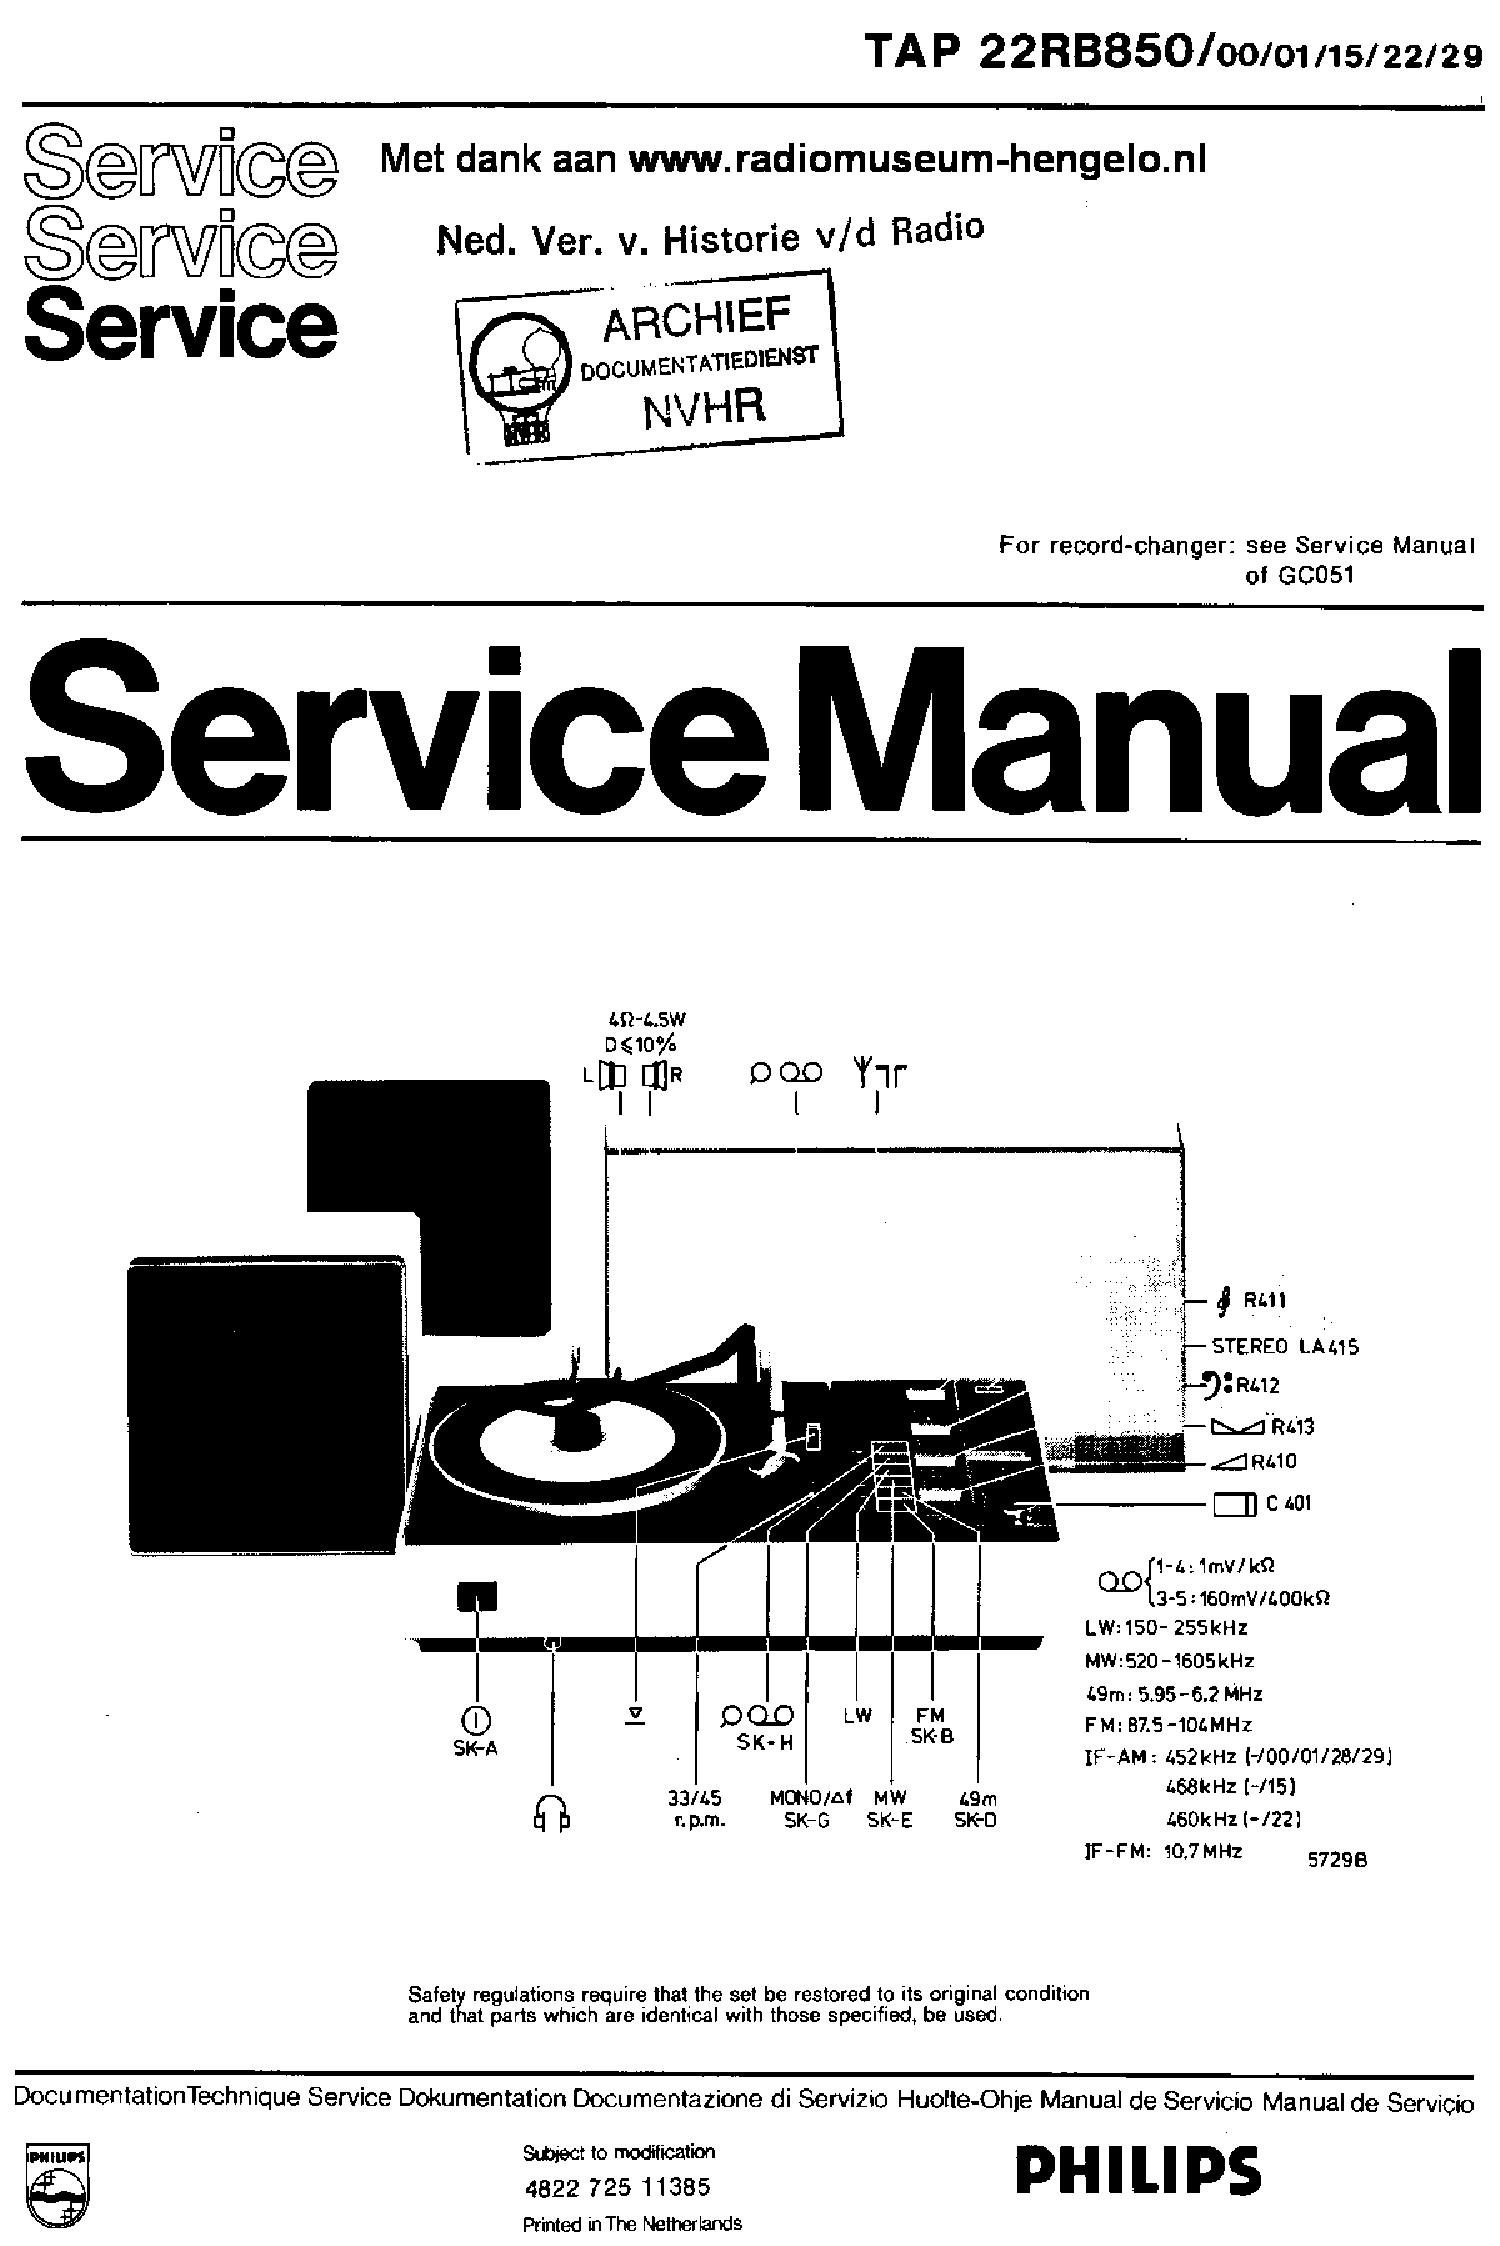 PHILIPS 22RB850-00-01-15-22-29 RECORD PLAYER SM service manual (1st page)